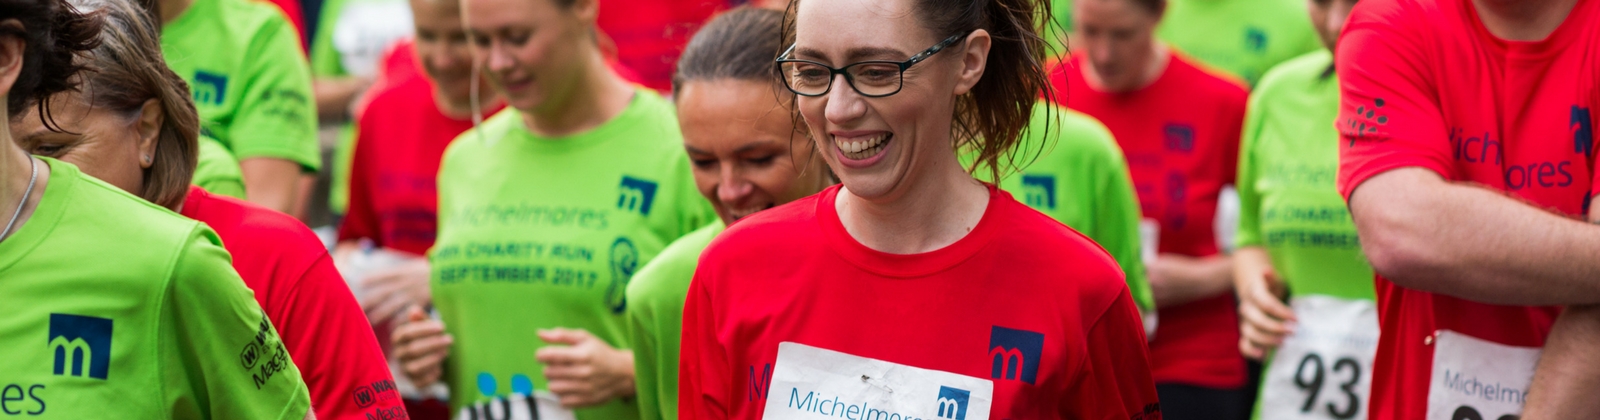 Michelmores 5k Charity Run shortlisted for Event of the Year